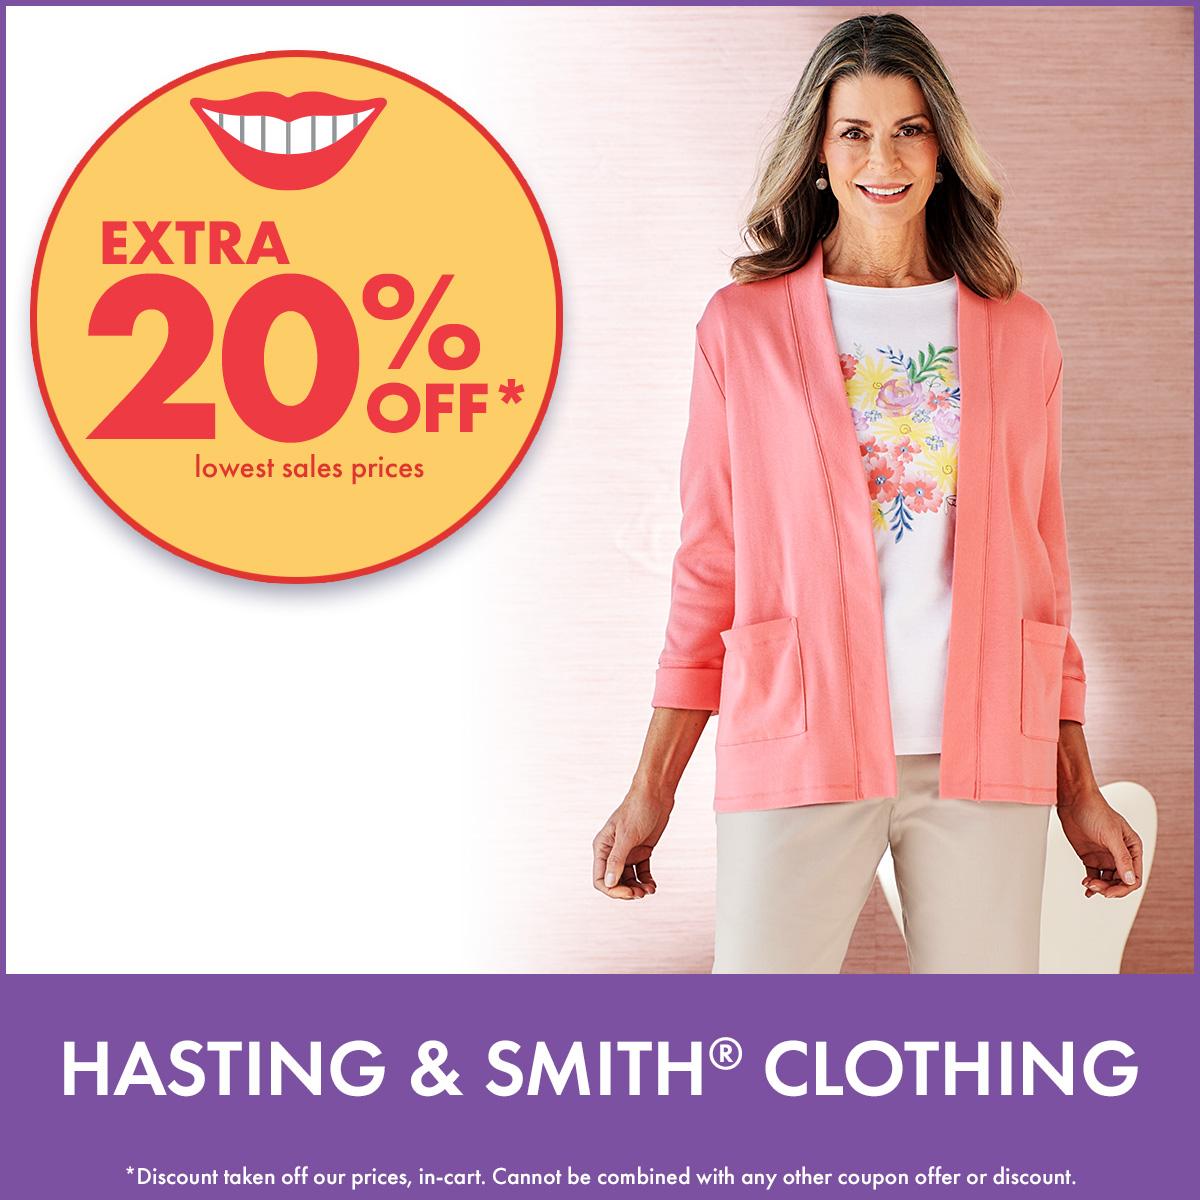 Extra 20% Off All Hasting & Smith Clothing